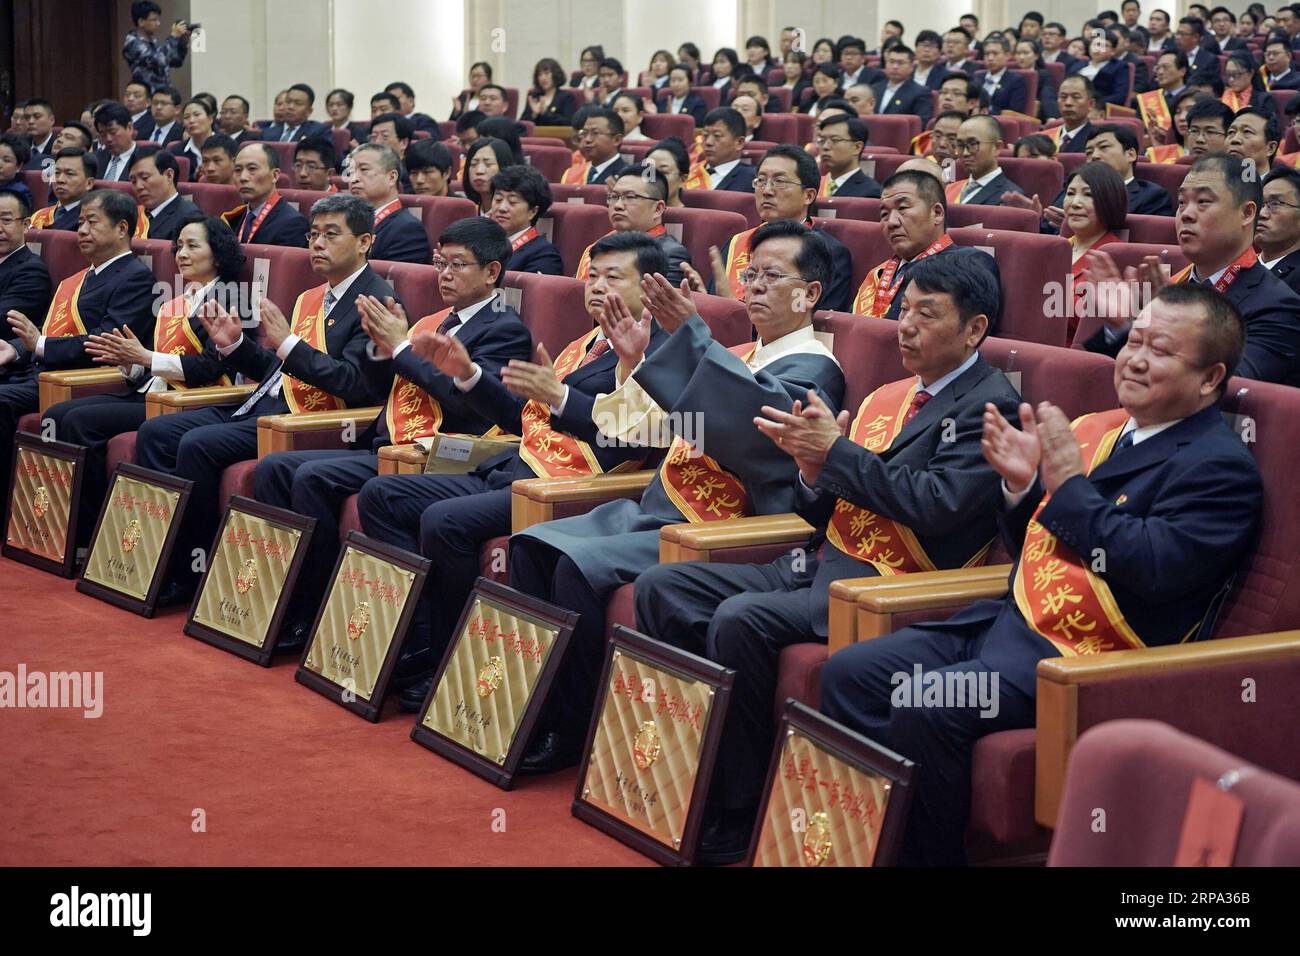 (190423) -- BEIJING, April 23, 2019 (Xinhua) -- Attendees applause during a conference held to highlight the contribution of model workers and groups in Beijing, capital of China, April 23, 2019. China on Tuesday held a conference here to highlight the contribution of model workers and groups ahead of the International Labor Day, which falls on May 1. A total of 695 individuals and more than 800 groups were honored at the event. (Xinhua/Cai Yang) CHINA-BEIJING-LABOR DAY-COMMENDATION (CN) PUBLICATIONxNOTxINxCHN Stock Photo